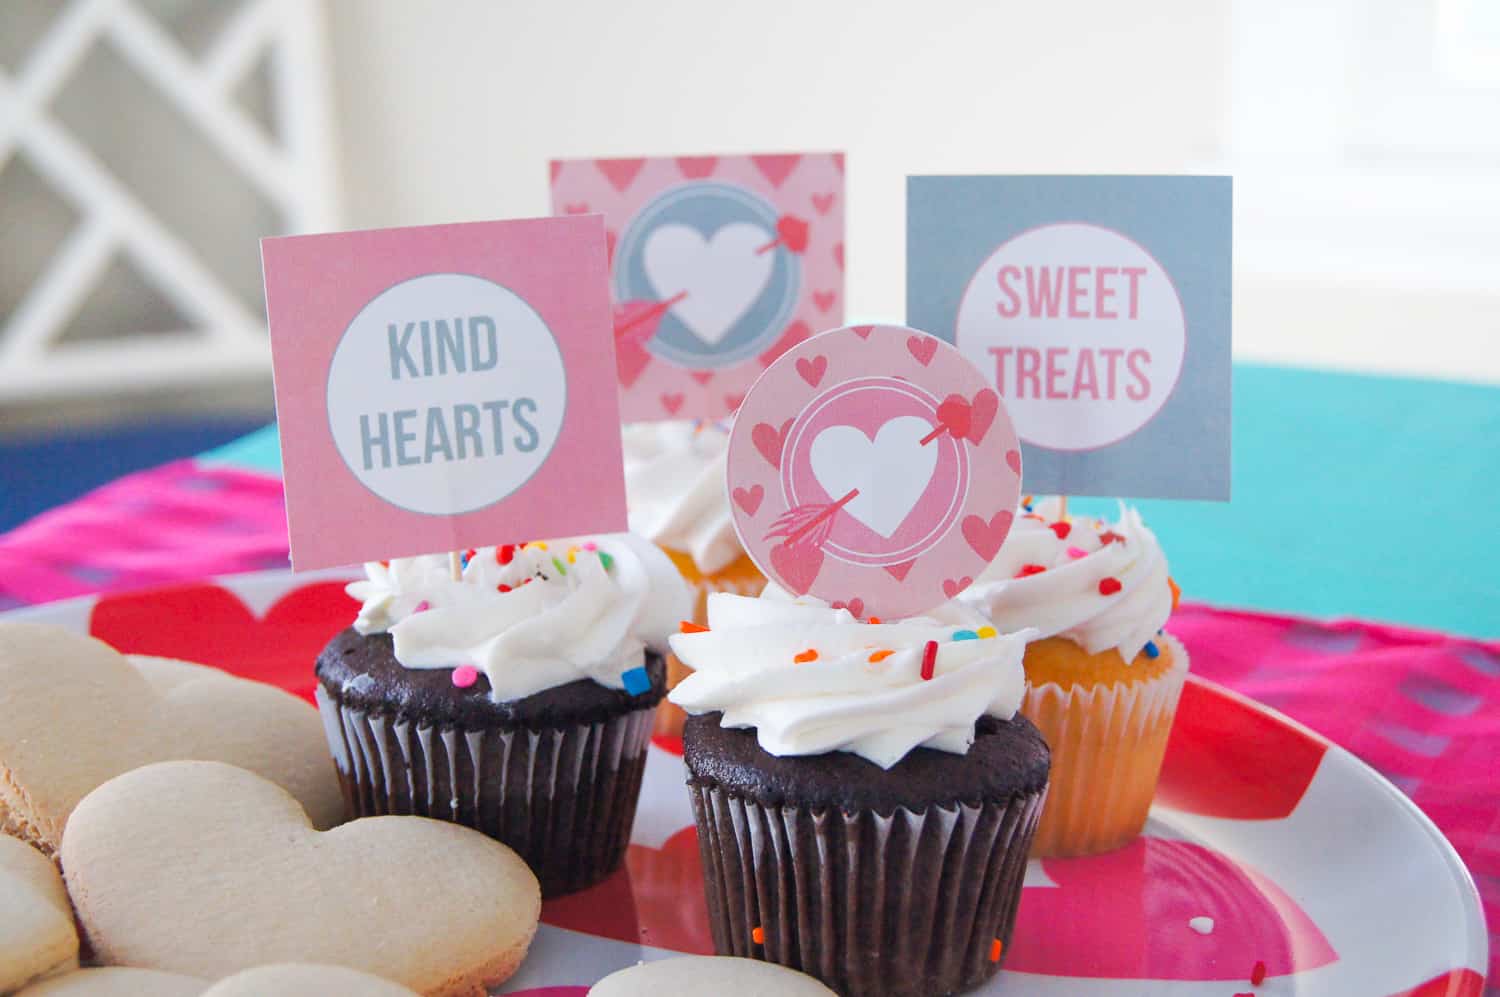 Valentine’s Day Play Date: Sweet Treats, Kind Hearts